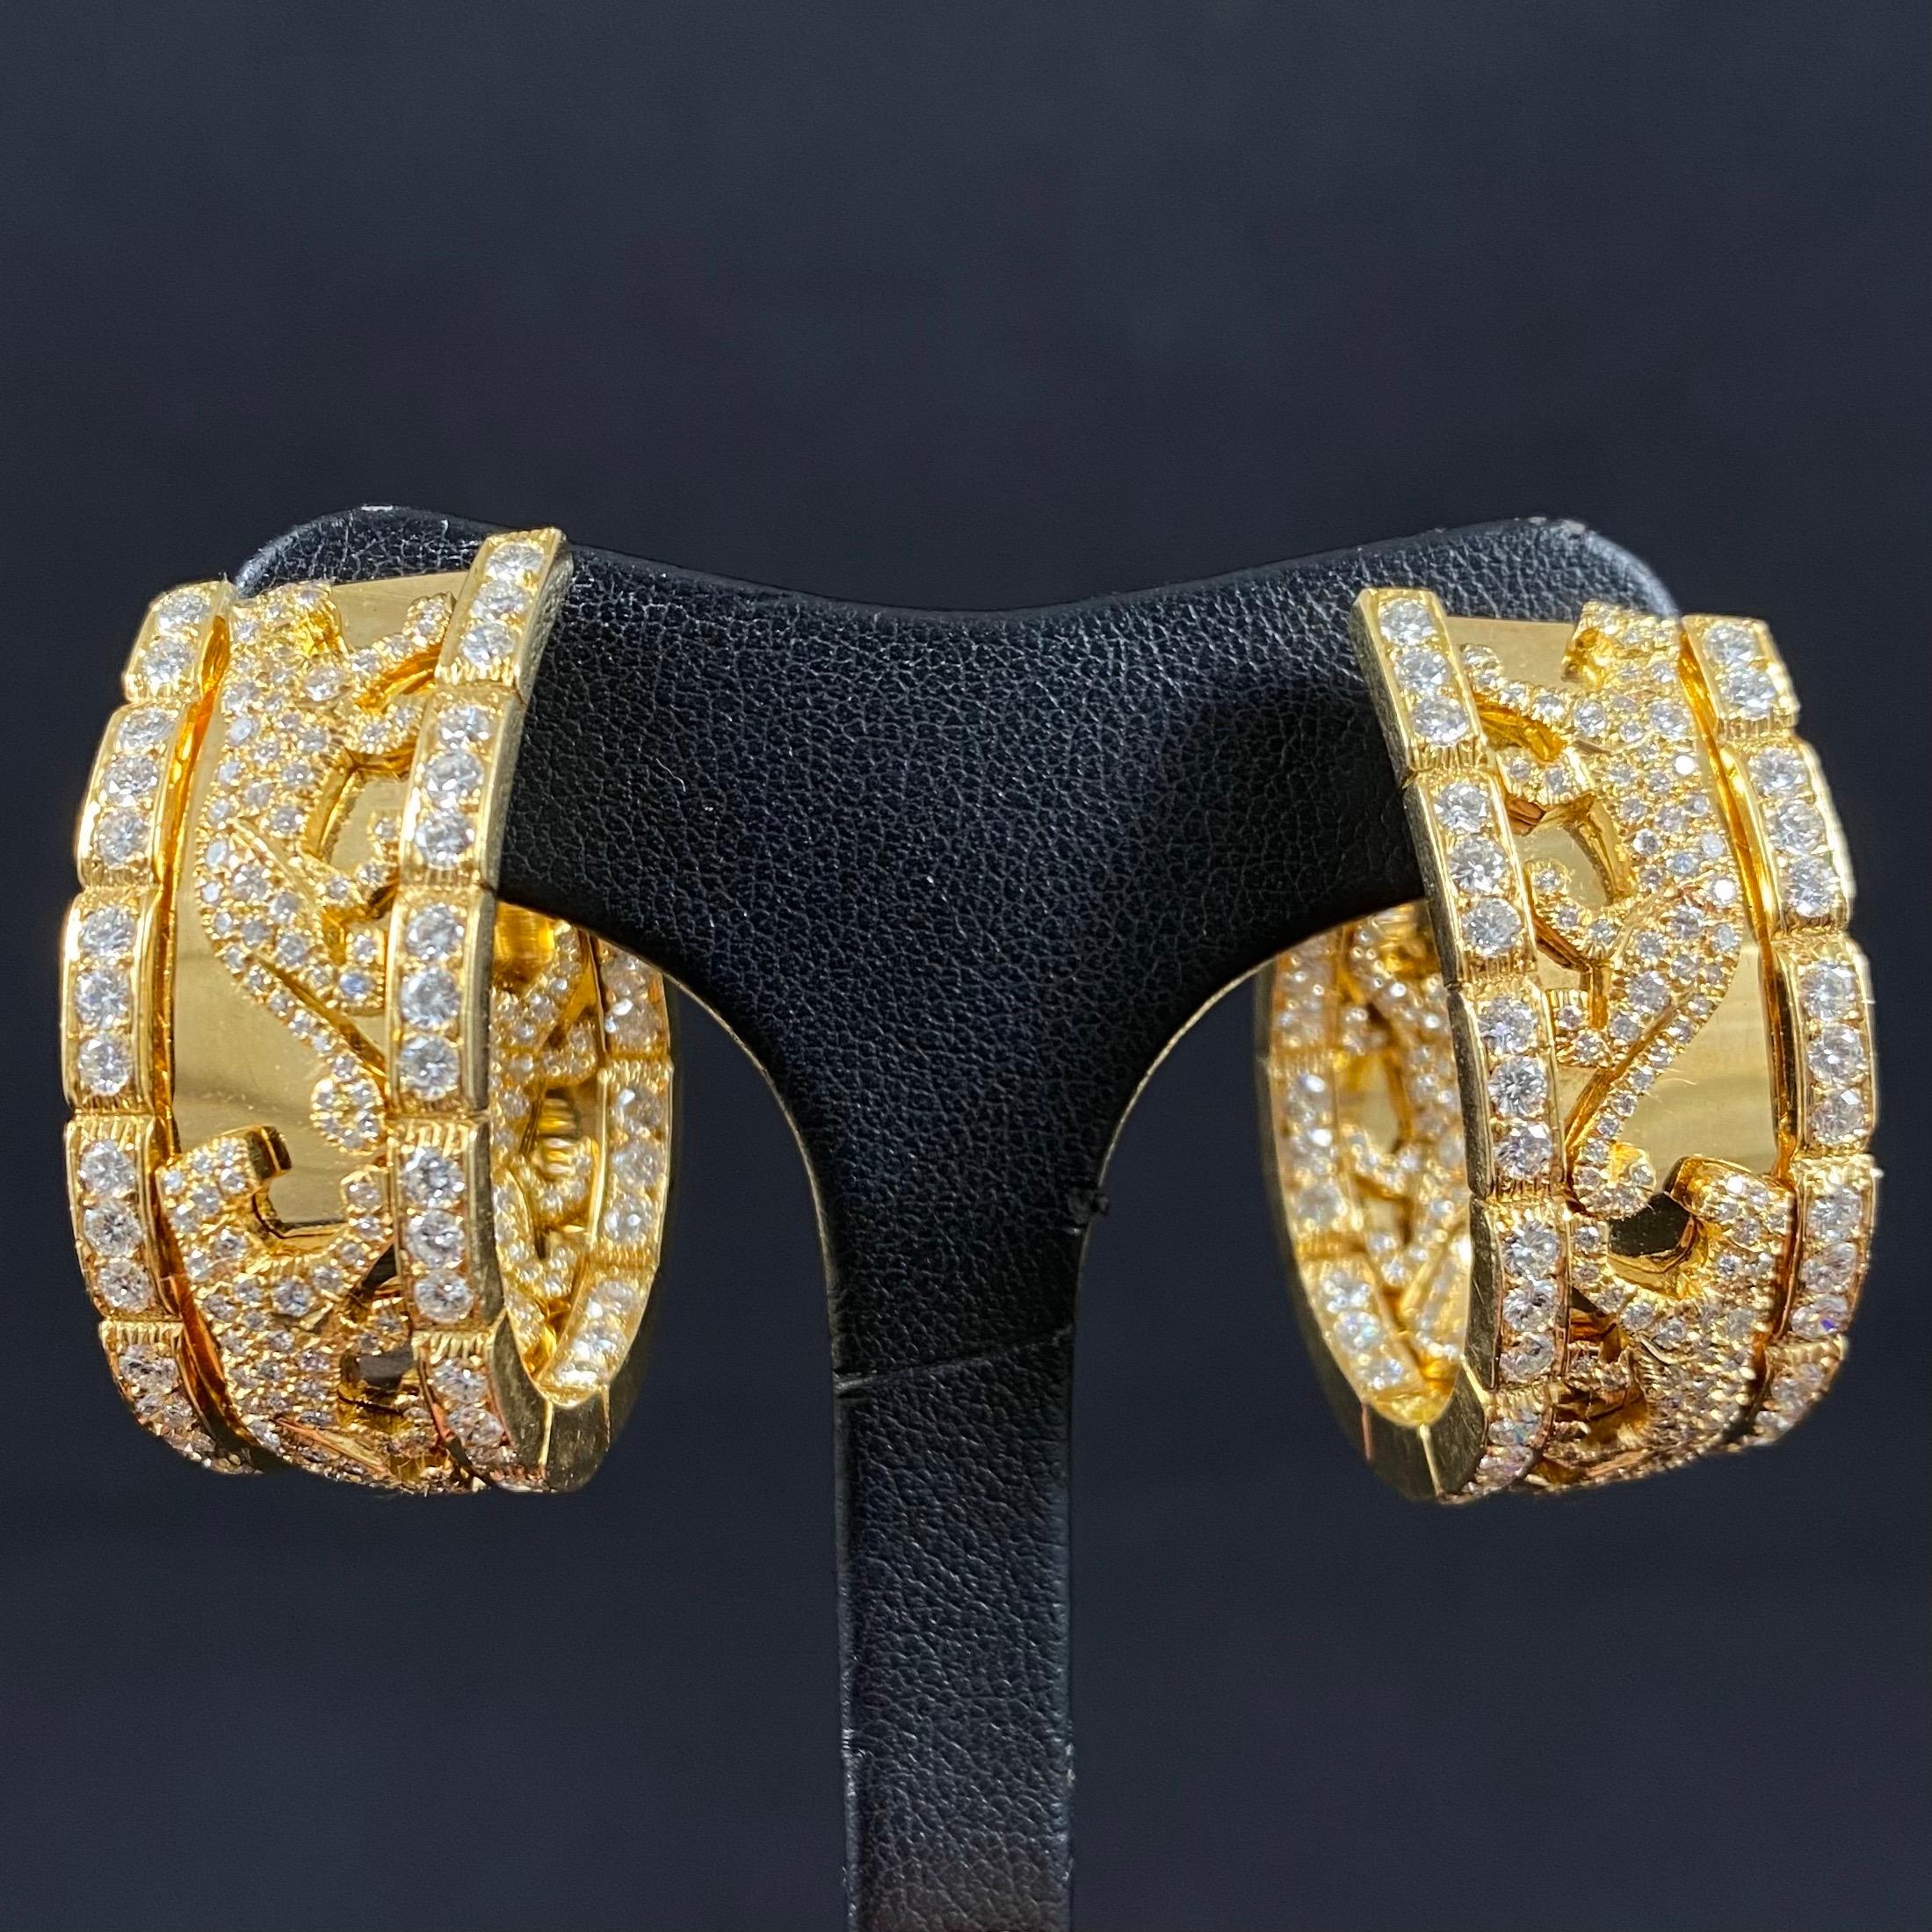 Cartier Panthere Walking Panther Diamond Hoop Earrings Yellow Gold Vintage 1980s 4